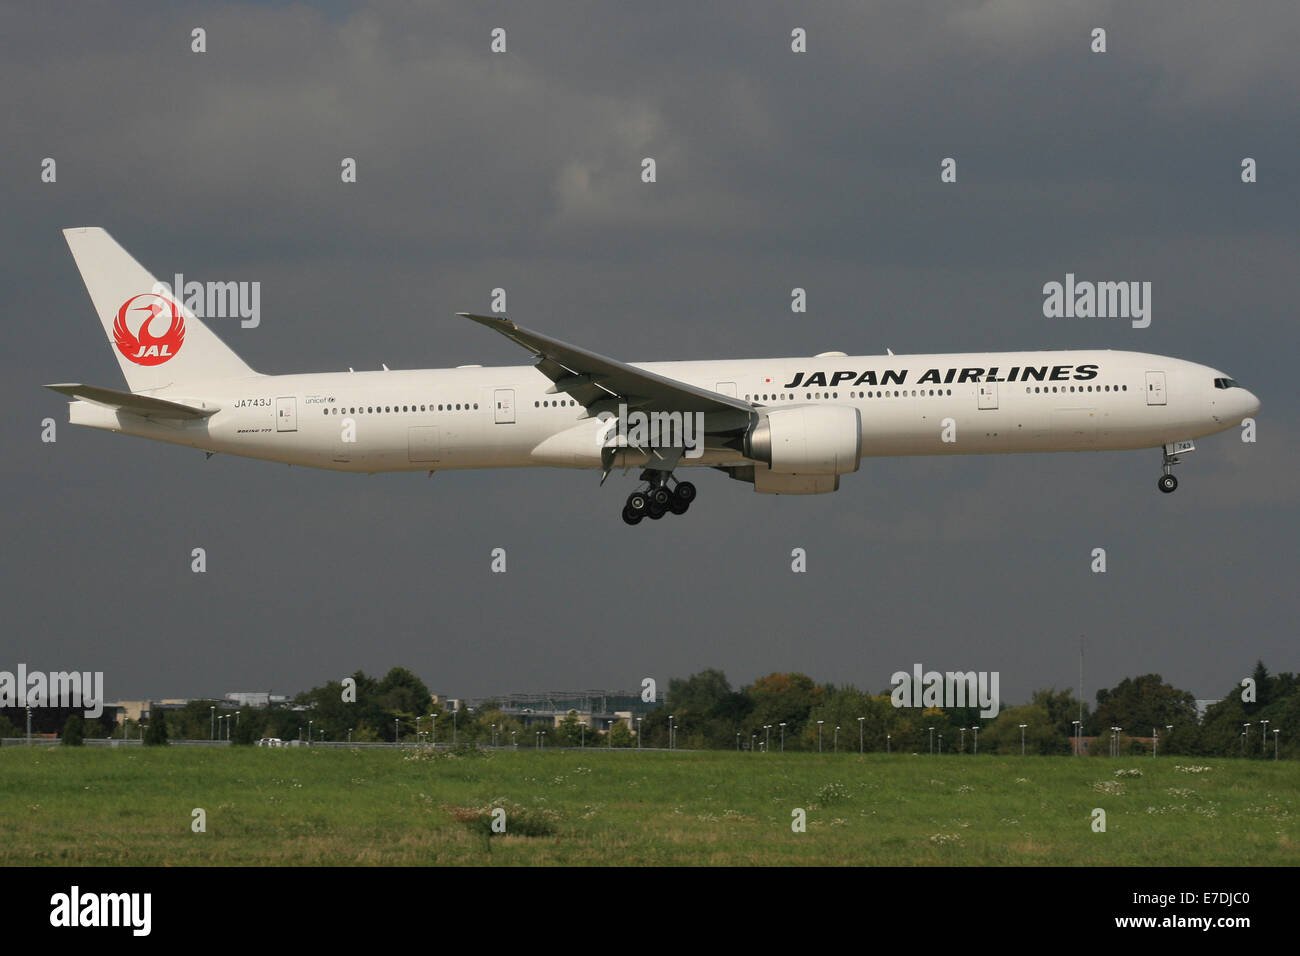 JAPAN AIRLINES BOEING 777 JAL Stock Photo